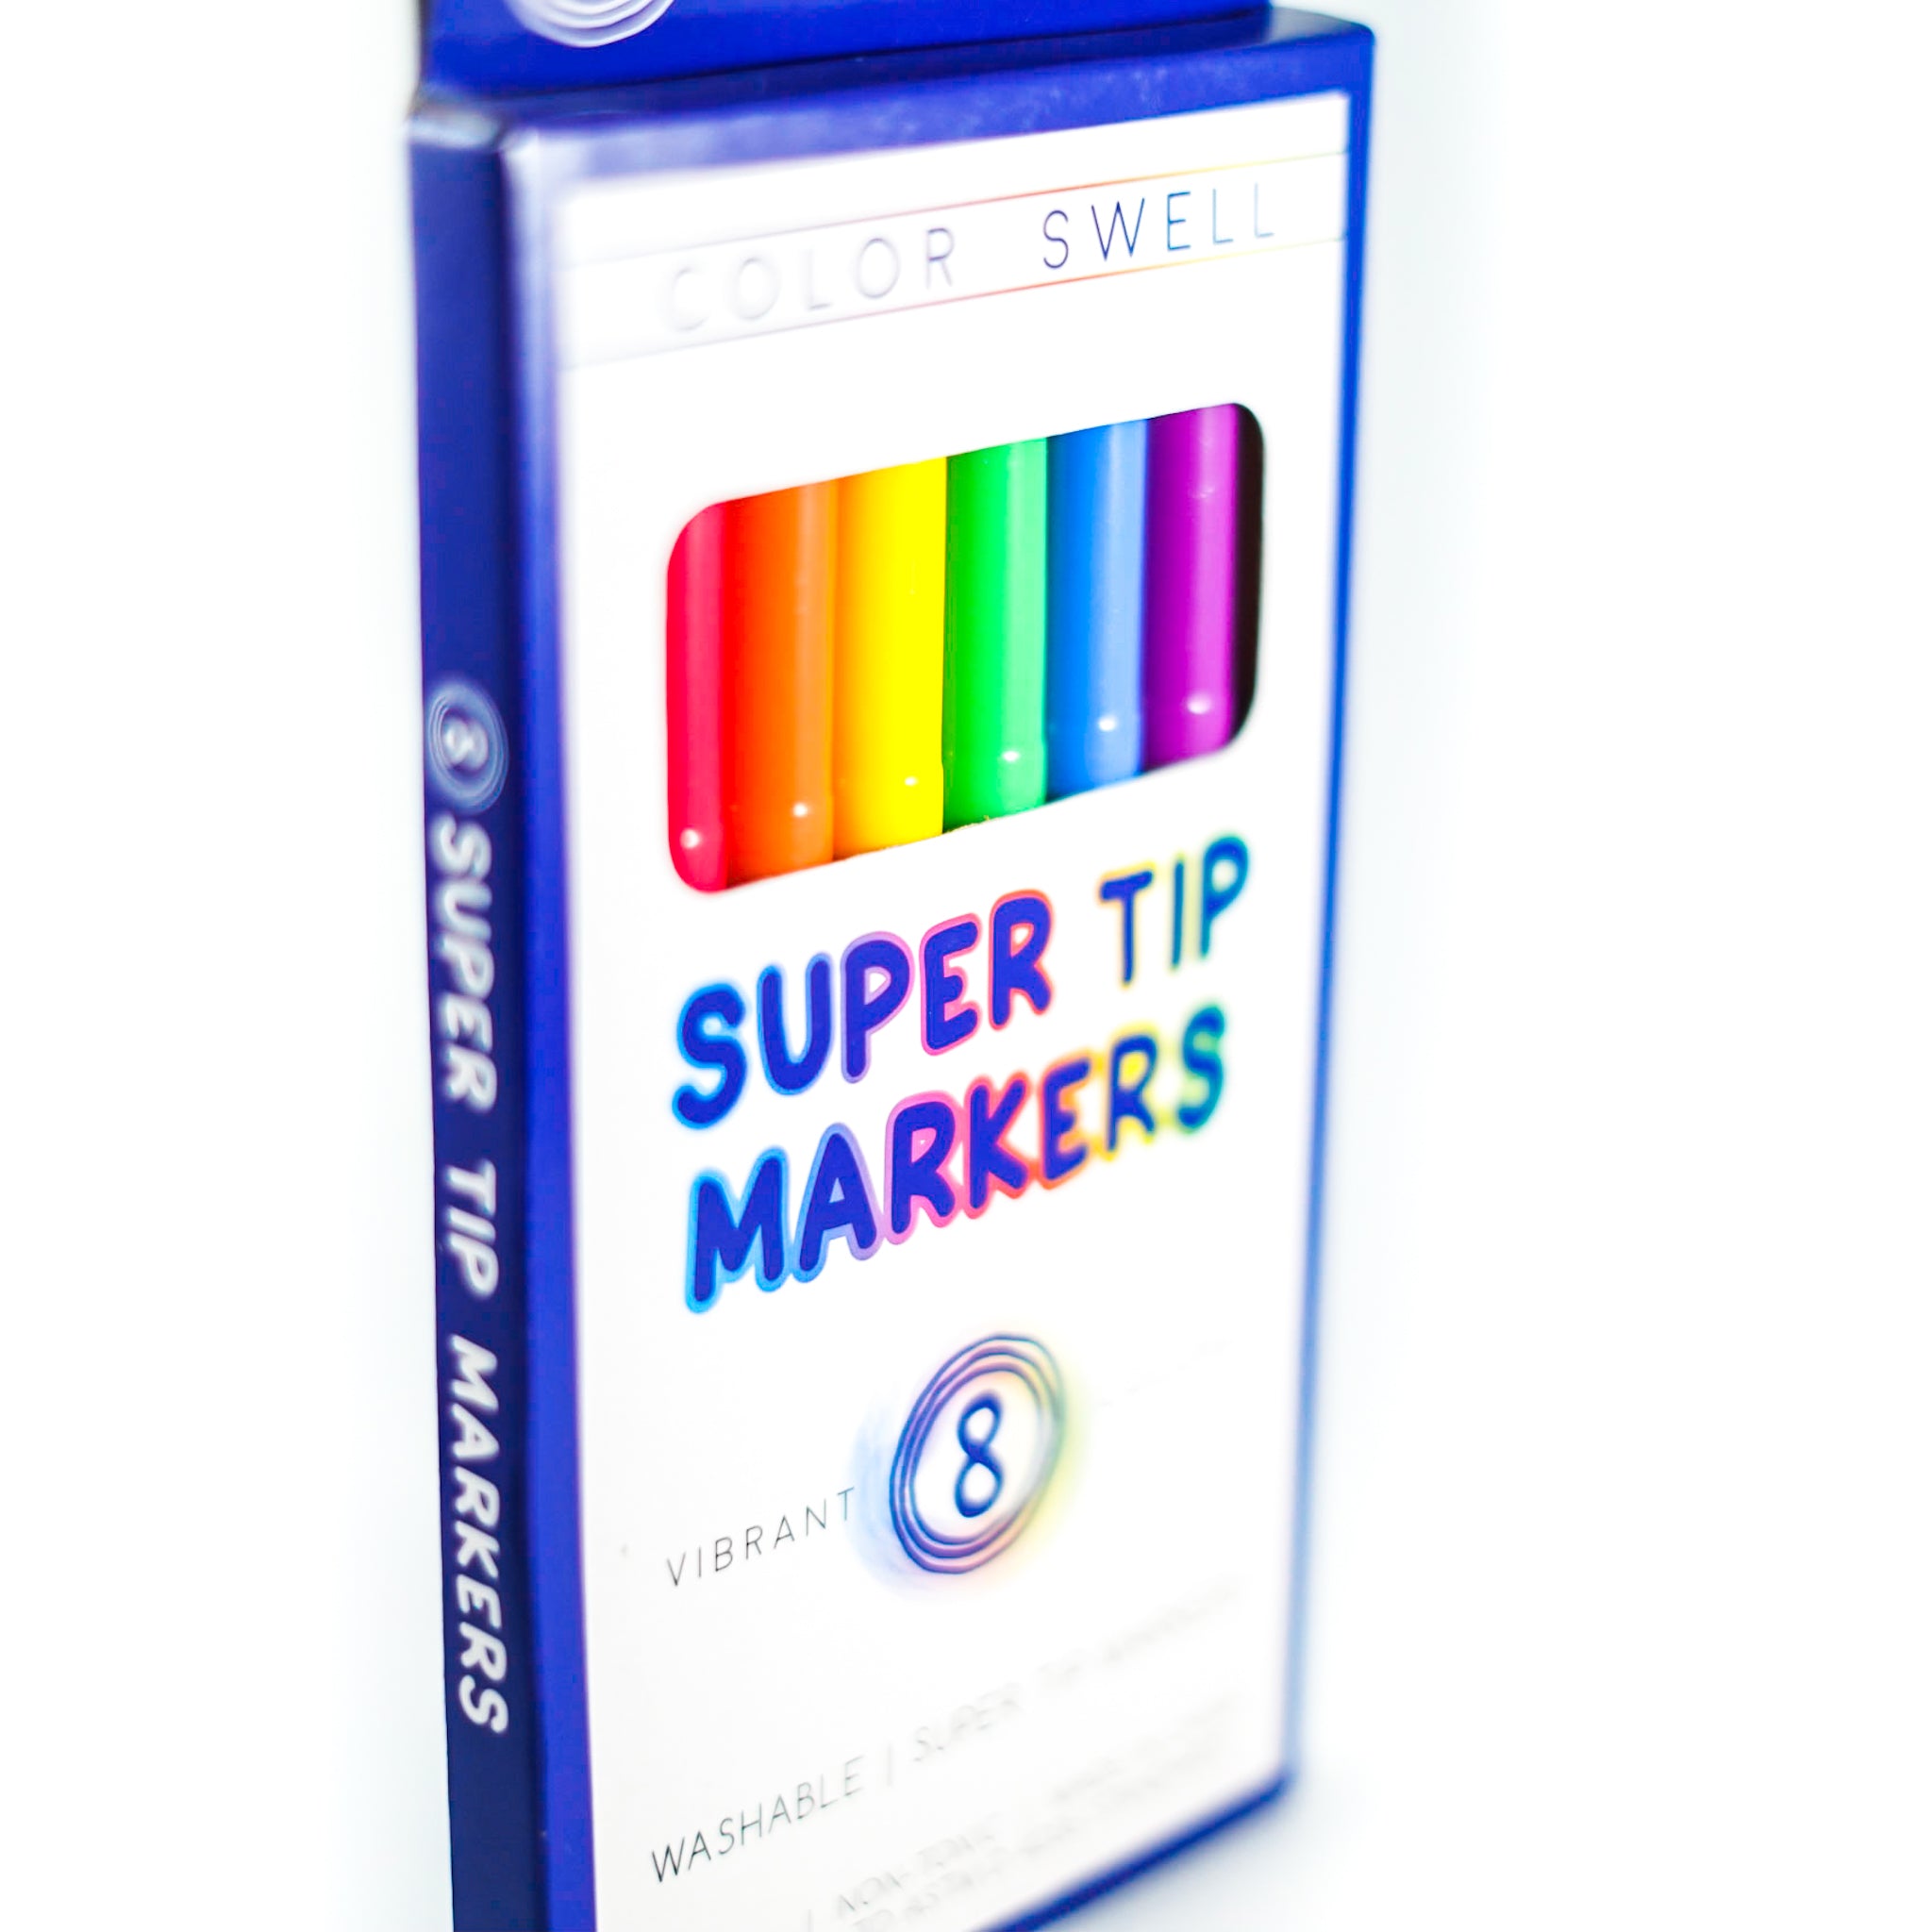 Color Swell Super Tip Washable Markers Bulk Pack 36 Boxes of 8 Vibrant Colors (288 Total)